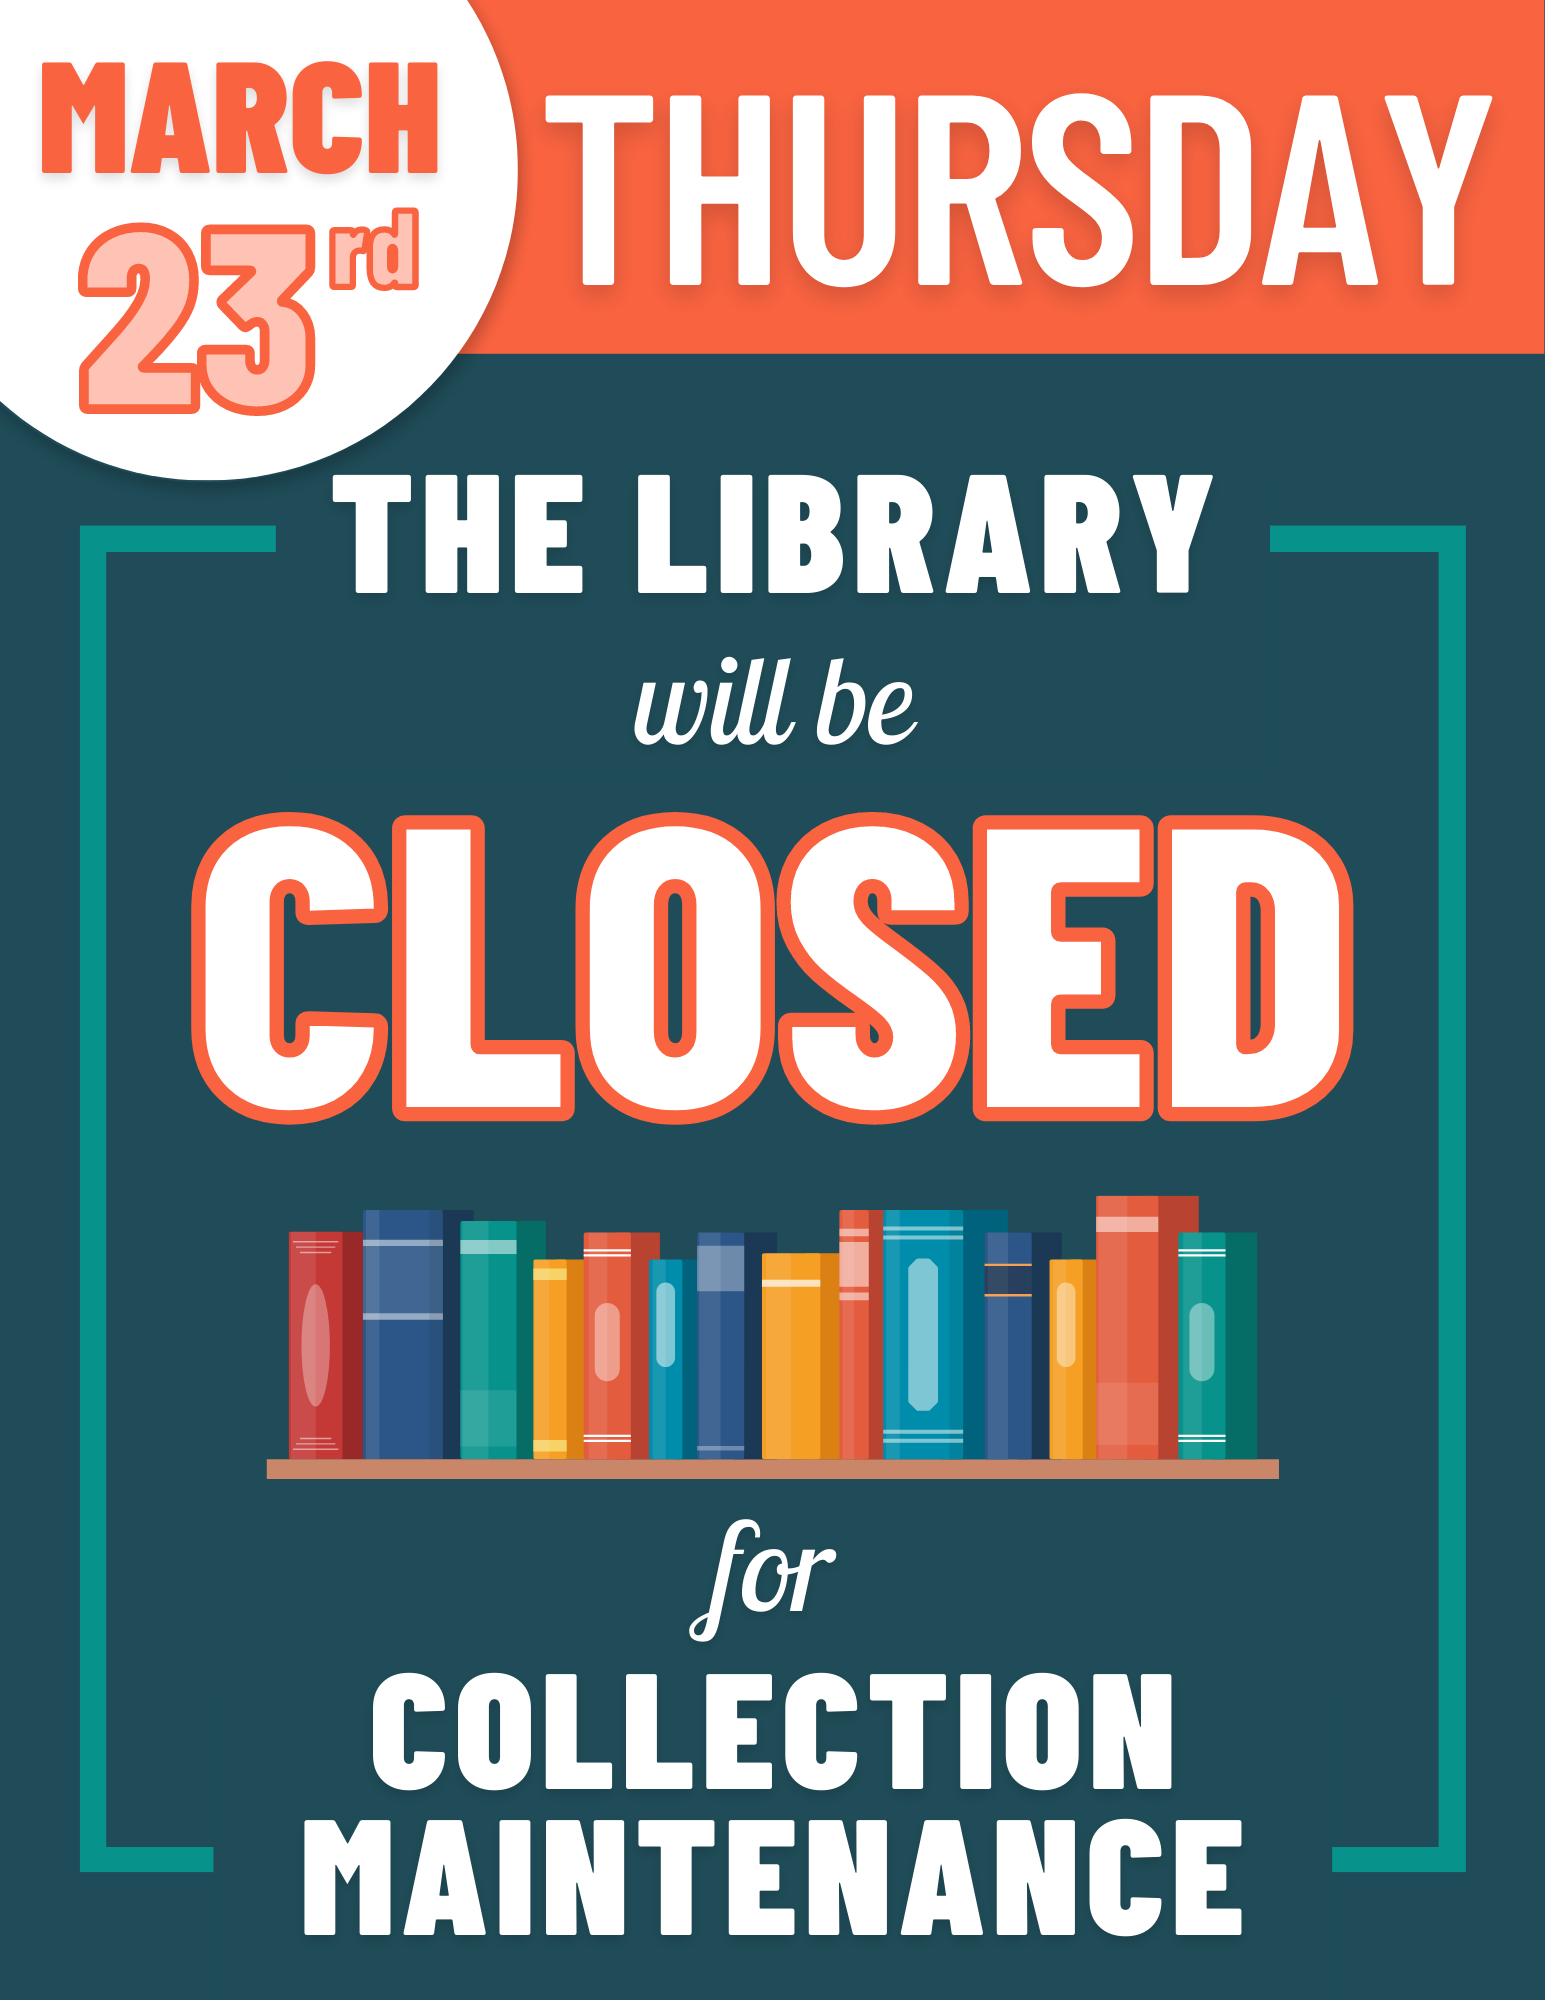 The Library will be Closed for Collection Maintenance